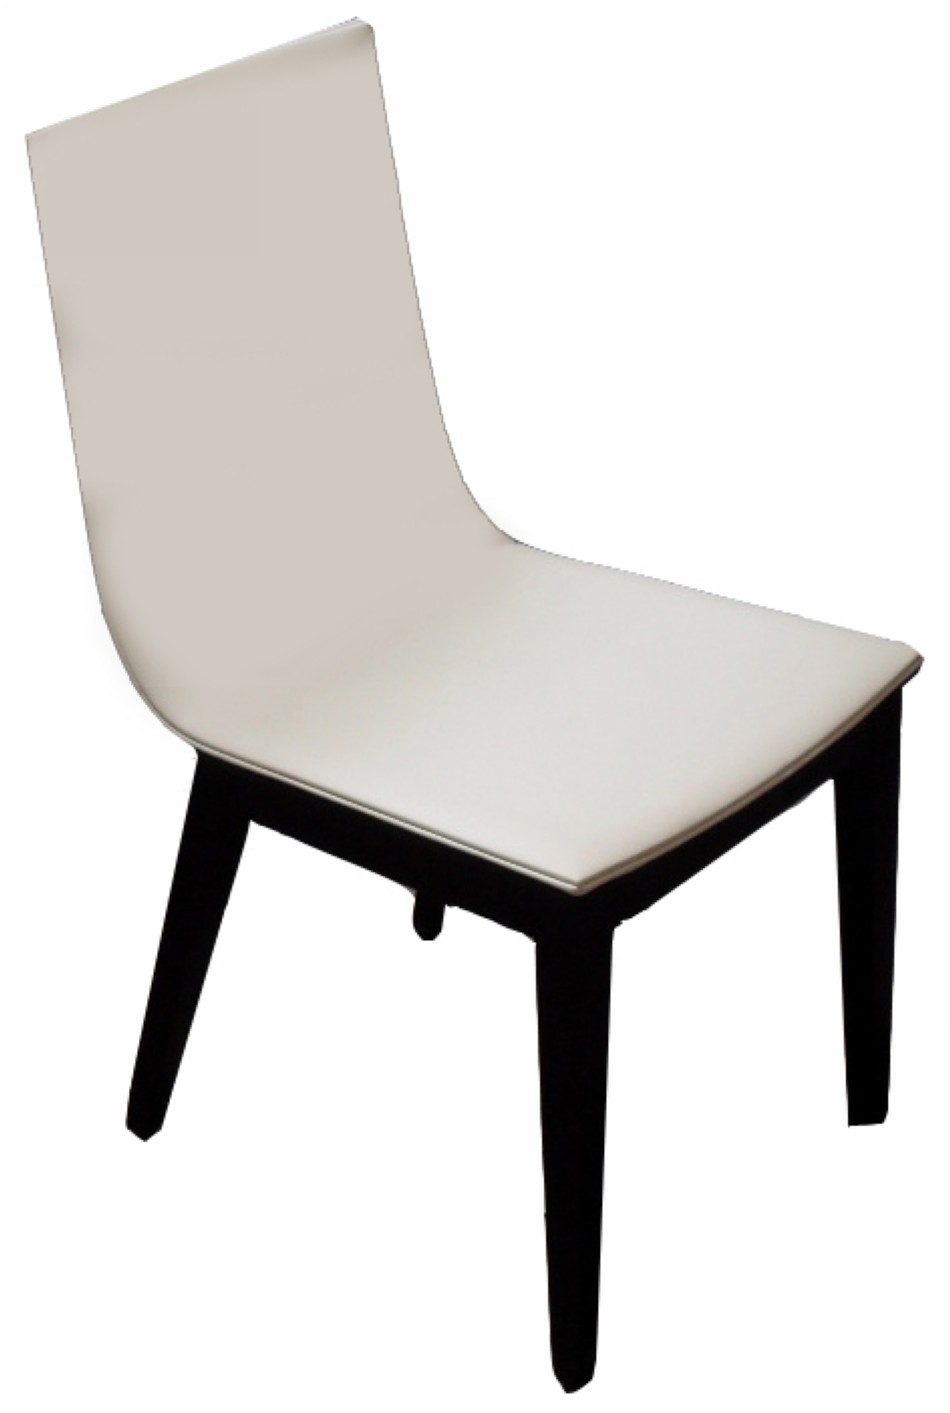 Extreme Modern White Leatherette Dining Chair